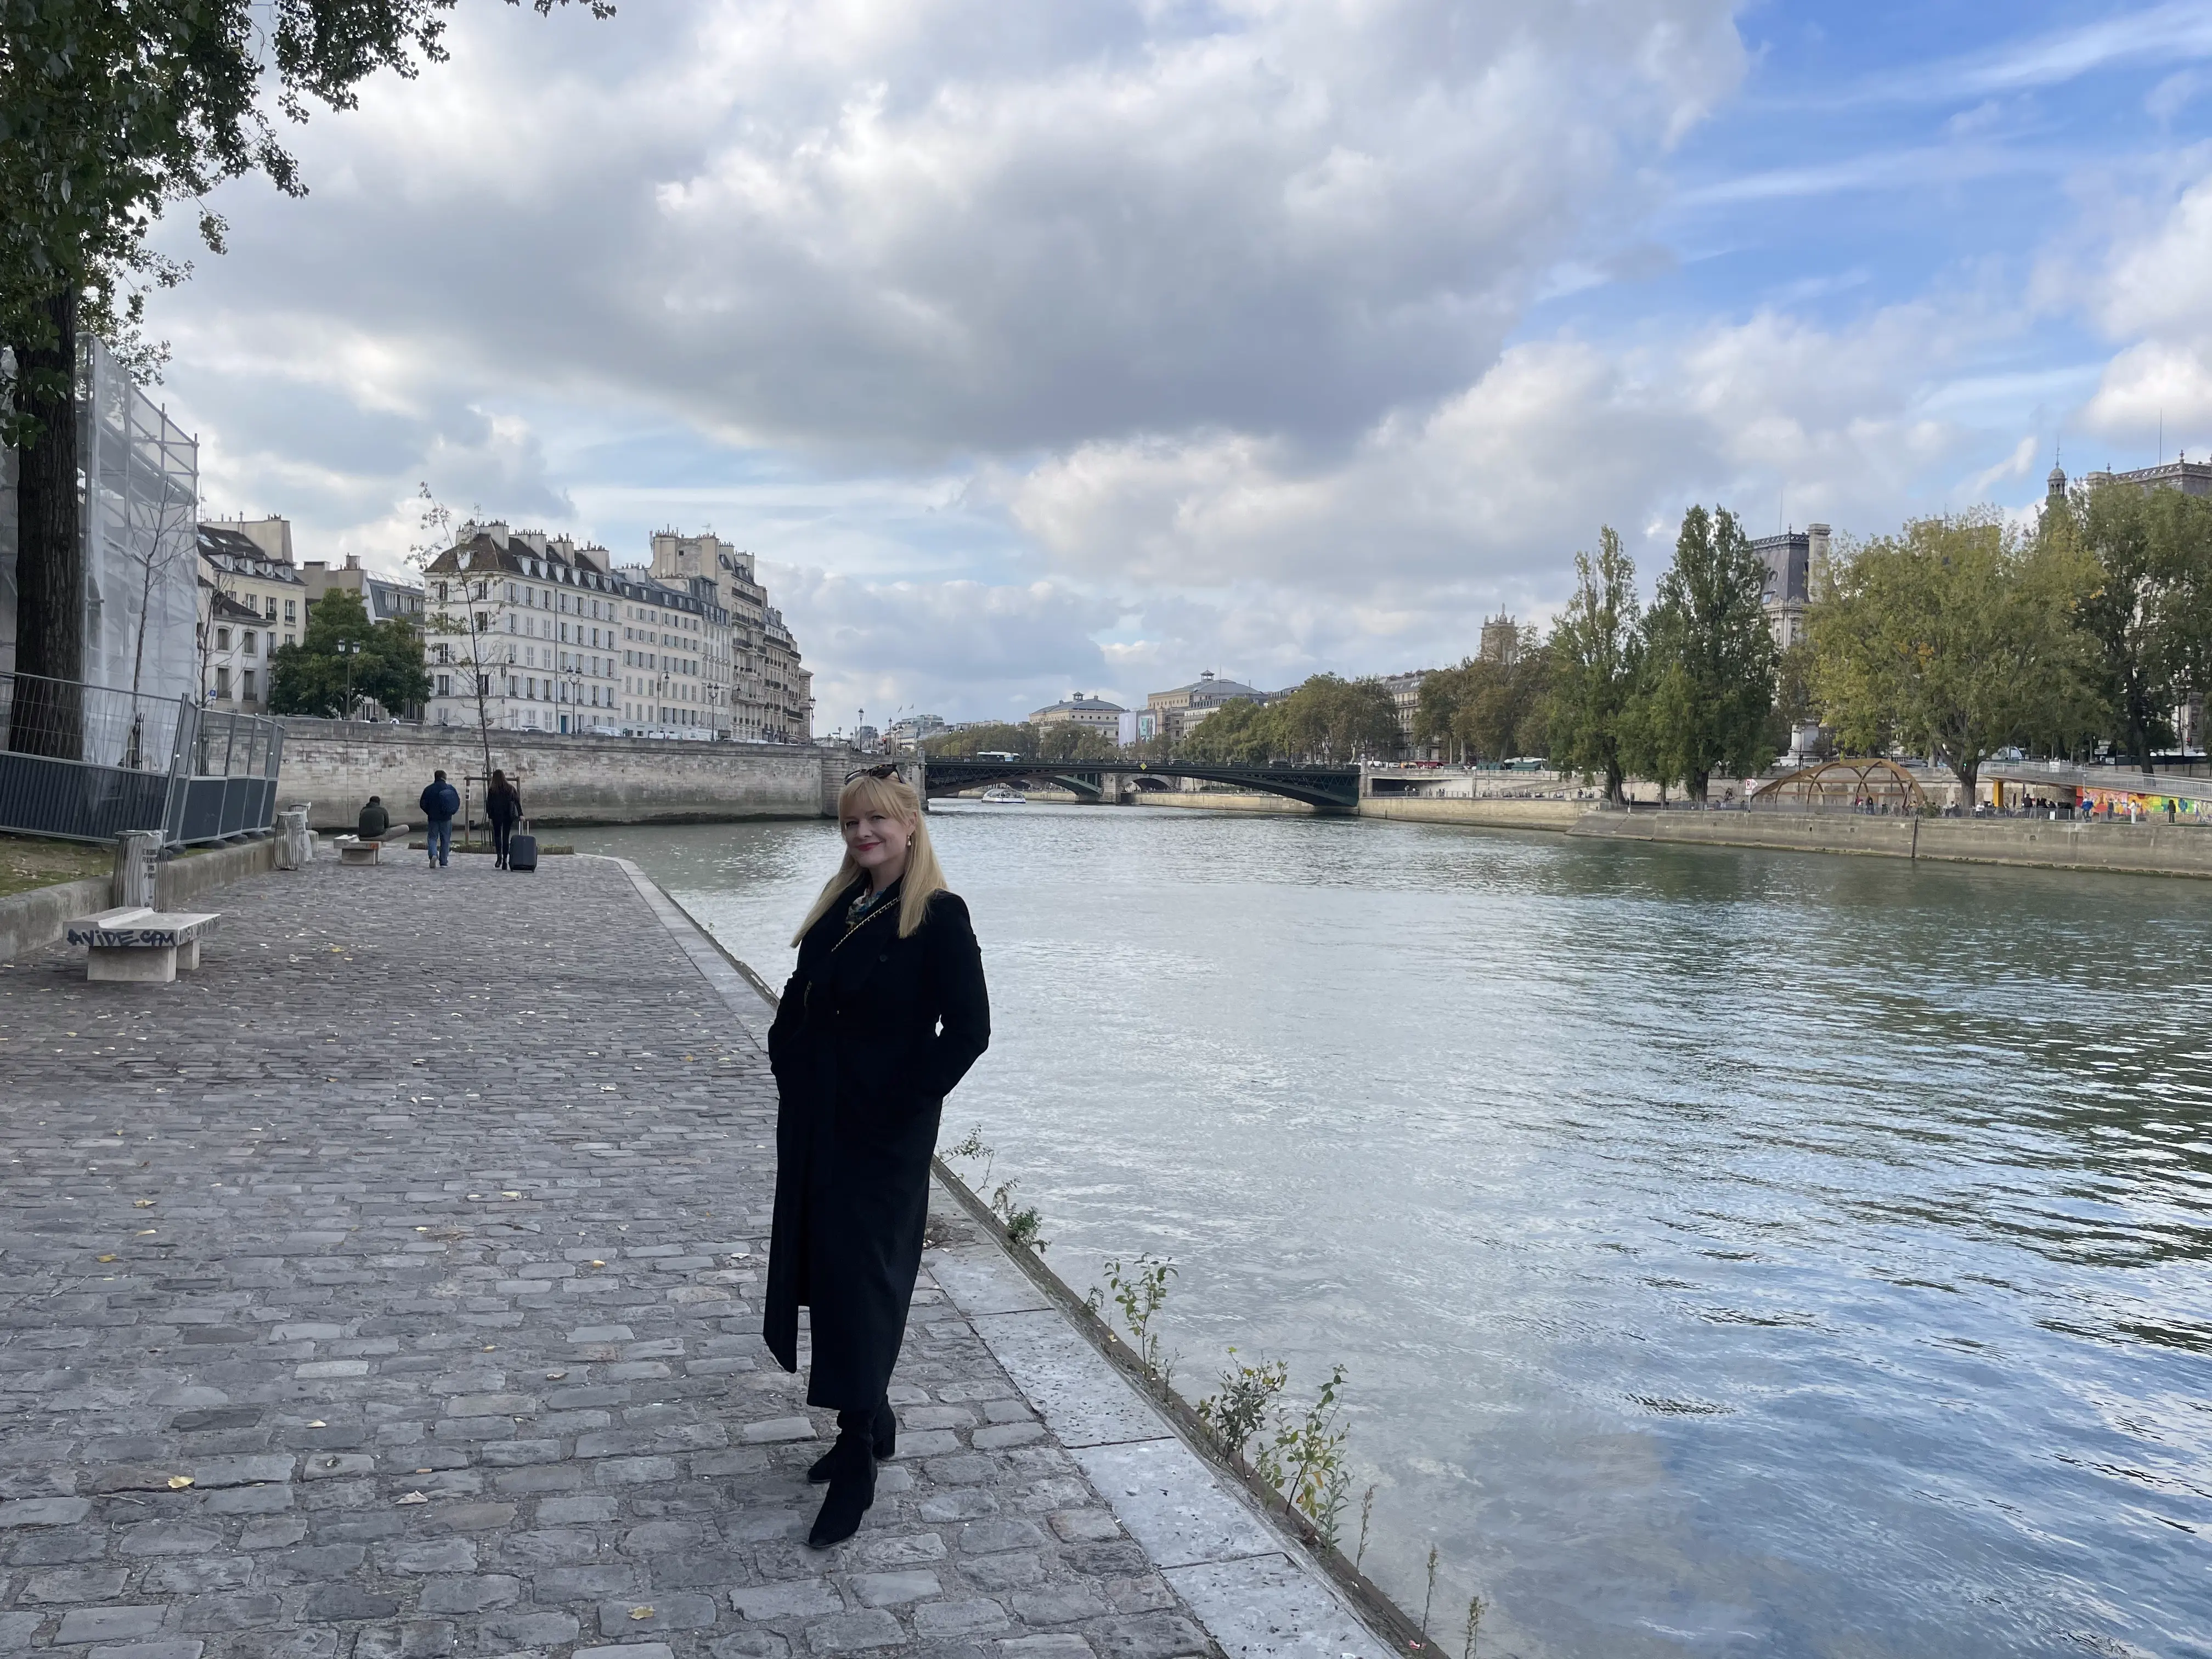 More walking along the Seine